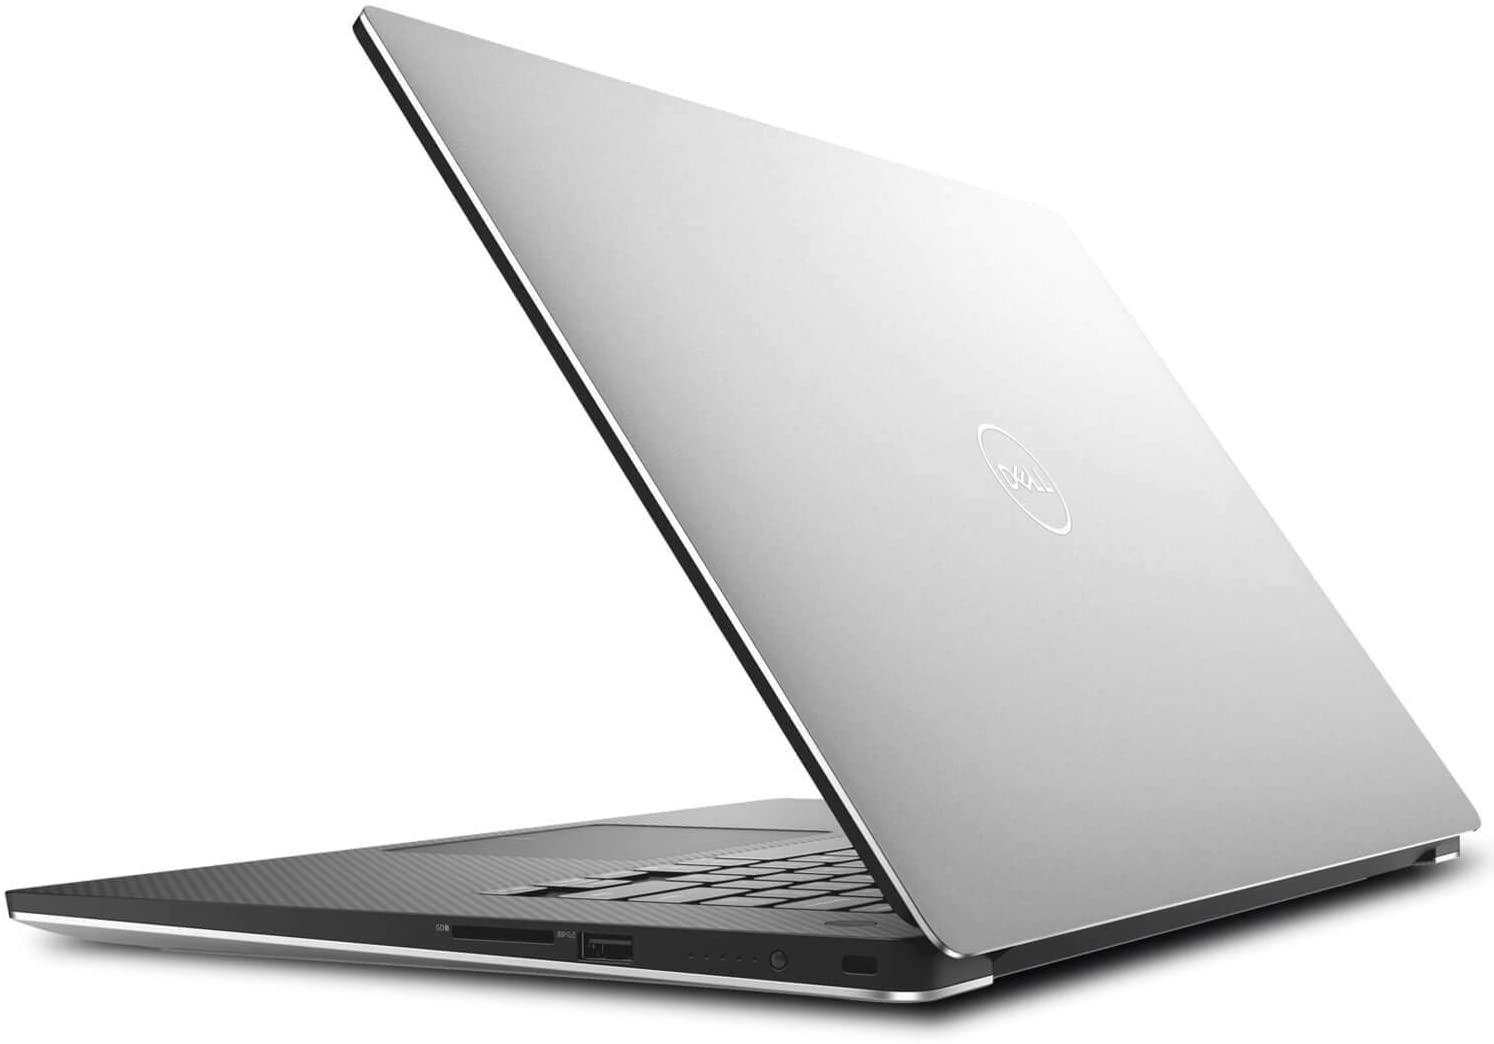 [Mới 100%] Laptop Dell XPS 15 7590 (Core i7-9750H, 16GB, 512GB, GTX 1650 4GB, 15.6 Inch 4K Touch)